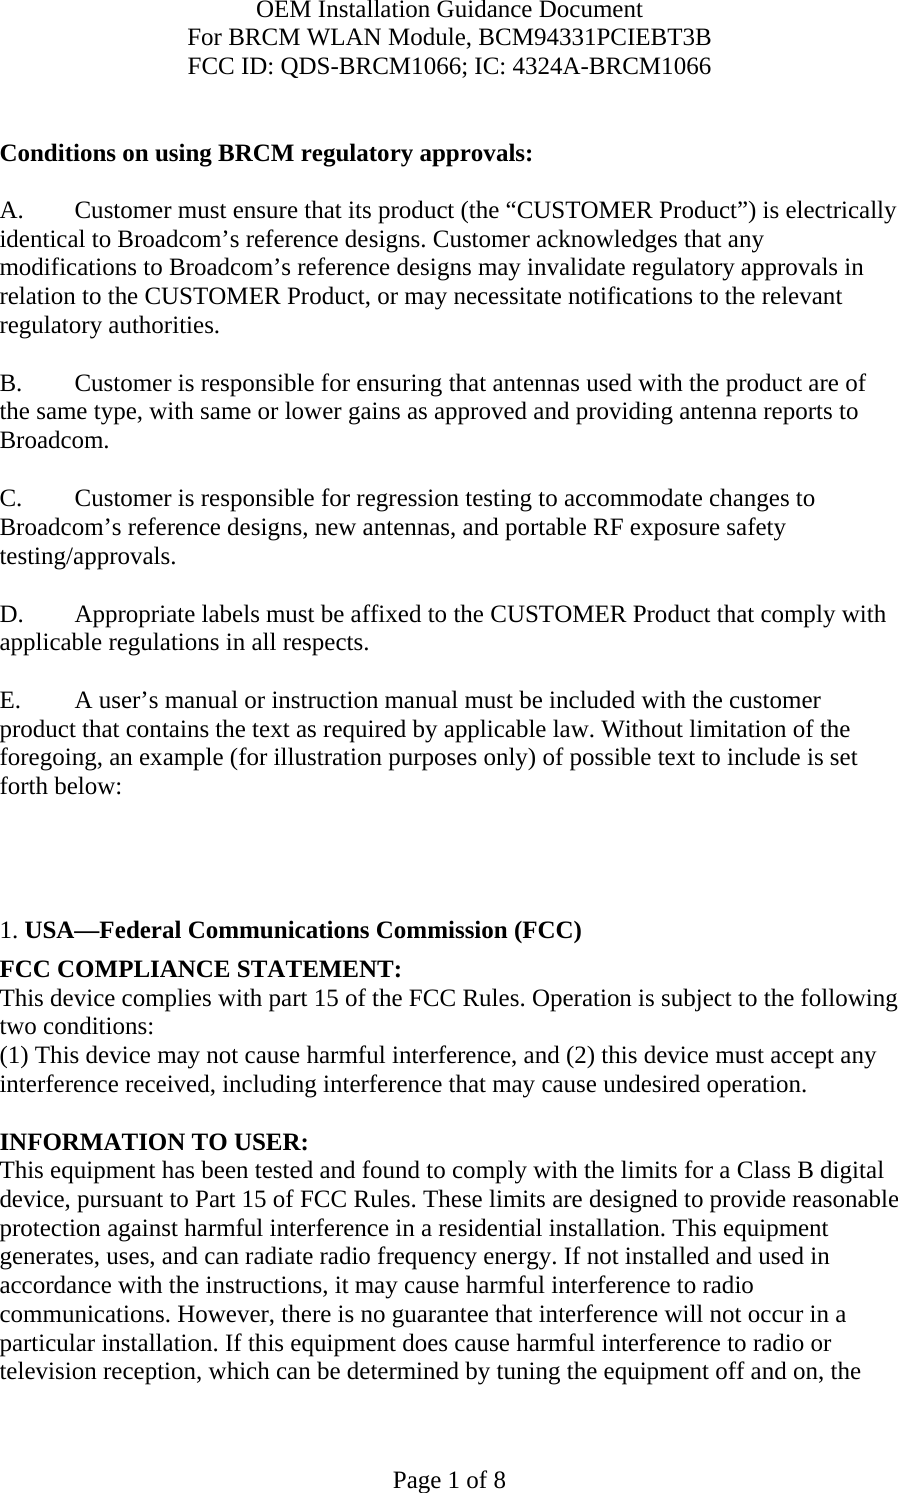 OEM Installation Guidance Document For BRCM WLAN Module, BCM94331PCIEBT3B FCC ID: QDS-BRCM1066; IC: 4324A-BRCM1066  Page 1 of 8  Conditions on using BRCM regulatory approvals:   A.  Customer must ensure that its product (the “CUSTOMER Product”) is electrically identical to Broadcom’s reference designs. Customer acknowledges that any modifications to Broadcom’s reference designs may invalidate regulatory approvals in relation to the CUSTOMER Product, or may necessitate notifications to the relevant regulatory authorities.  B.   Customer is responsible for ensuring that antennas used with the product are of the same type, with same or lower gains as approved and providing antenna reports to Broadcom.  C.   Customer is responsible for regression testing to accommodate changes to Broadcom’s reference designs, new antennas, and portable RF exposure safety testing/approvals.  D.  Appropriate labels must be affixed to the CUSTOMER Product that comply with applicable regulations in all respects.    E.  A user’s manual or instruction manual must be included with the customer product that contains the text as required by applicable law. Without limitation of the foregoing, an example (for illustration purposes only) of possible text to include is set forth below:       1. USA—Federal Communications Commission (FCC) FCC COMPLIANCE STATEMENT: This device complies with part 15 of the FCC Rules. Operation is subject to the following two conditions: (1) This device may not cause harmful interference, and (2) this device must accept any interference received, including interference that may cause undesired operation.  INFORMATION TO USER: This equipment has been tested and found to comply with the limits for a Class B digital device, pursuant to Part 15 of FCC Rules. These limits are designed to provide reasonable protection against harmful interference in a residential installation. This equipment generates, uses, and can radiate radio frequency energy. If not installed and used in accordance with the instructions, it may cause harmful interference to radio communications. However, there is no guarantee that interference will not occur in a particular installation. If this equipment does cause harmful interference to radio or television reception, which can be determined by tuning the equipment off and on, the 